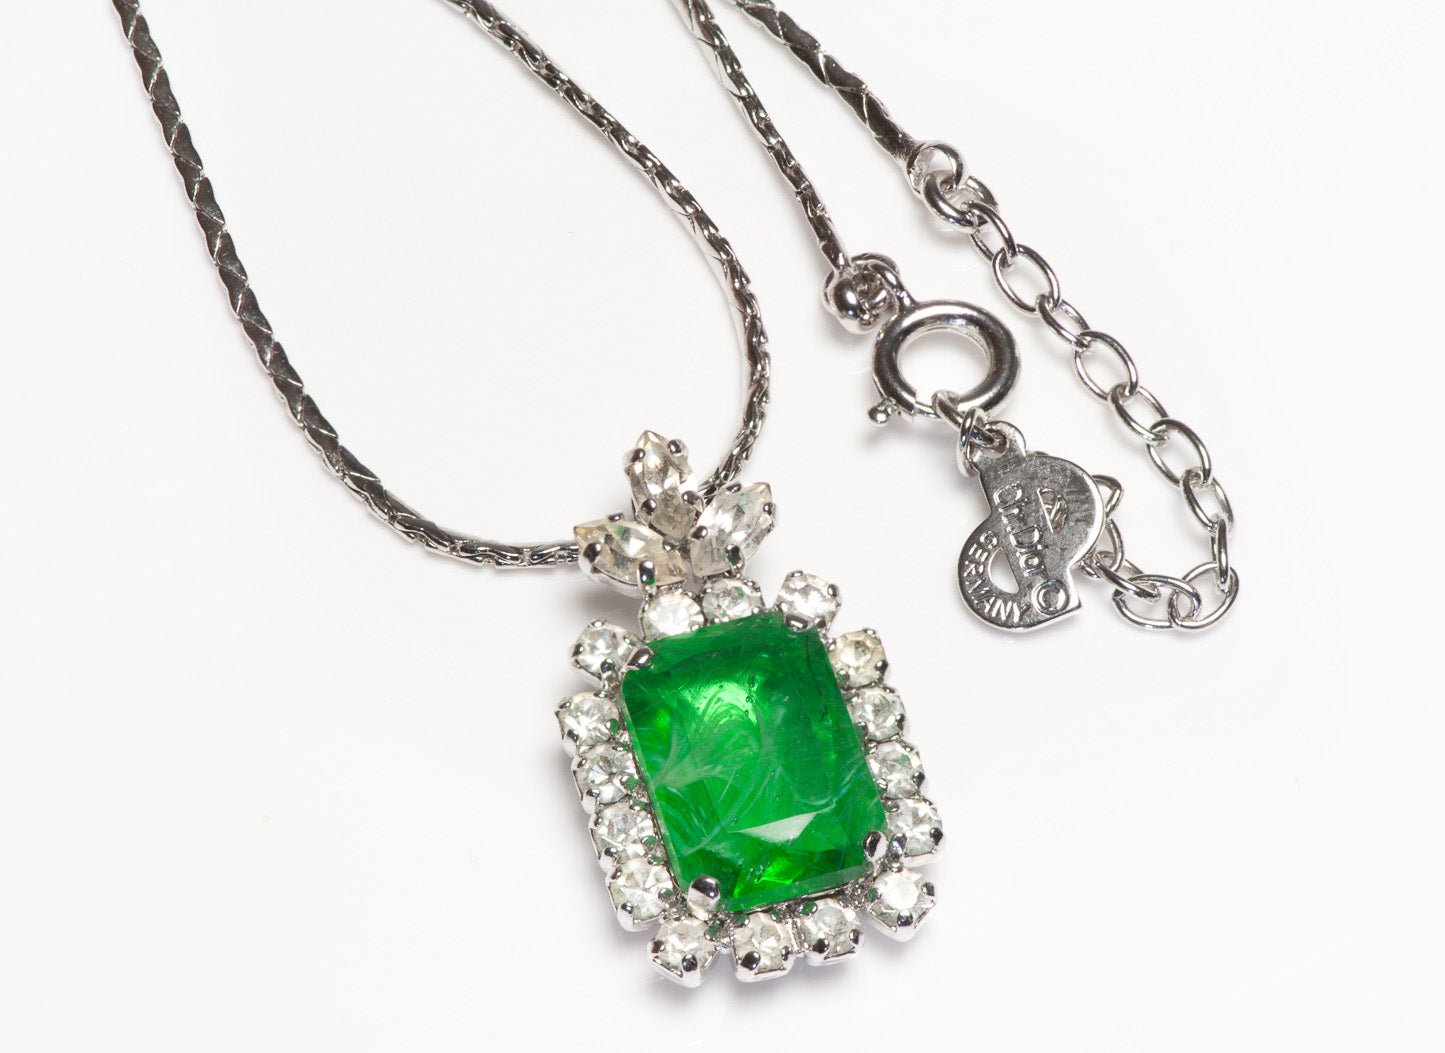 Christian Dior 1970’s Henkel & Grosse Green Crystal Chain Pendant Necklace - DSF Antique Jewelry